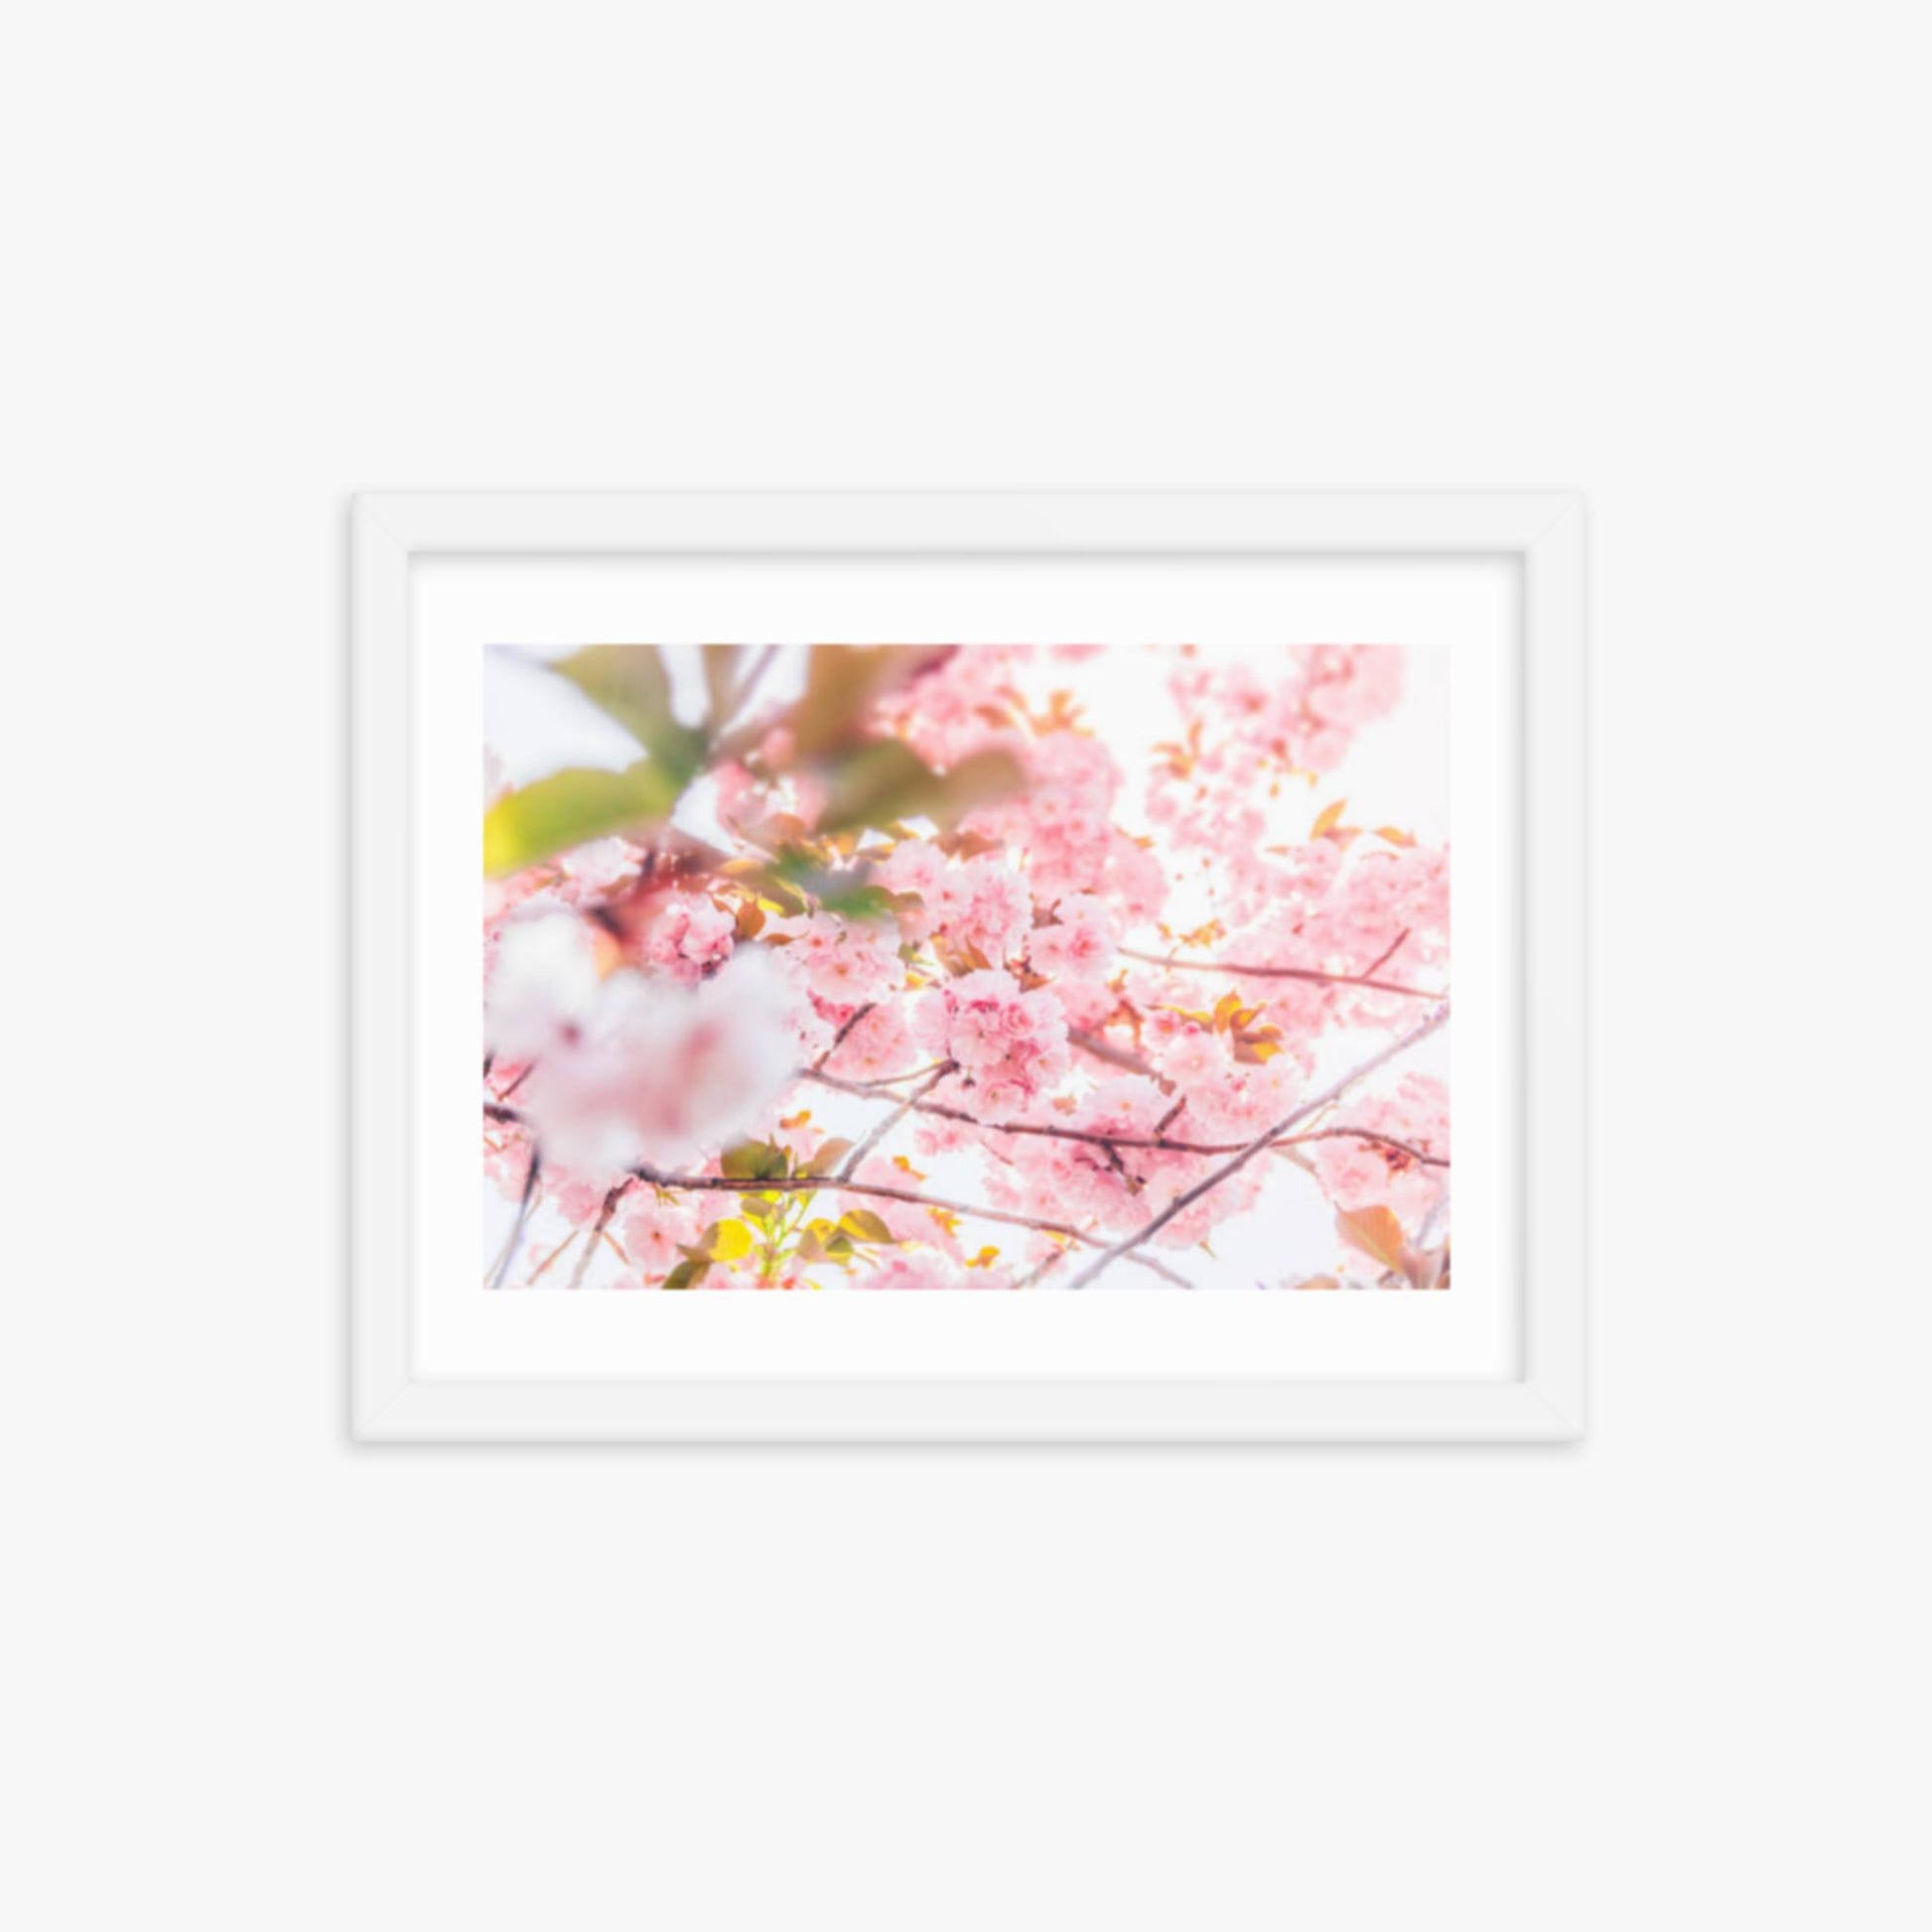 Cherry blossom flowers and sunshine 12x16 in Poster With White Frame